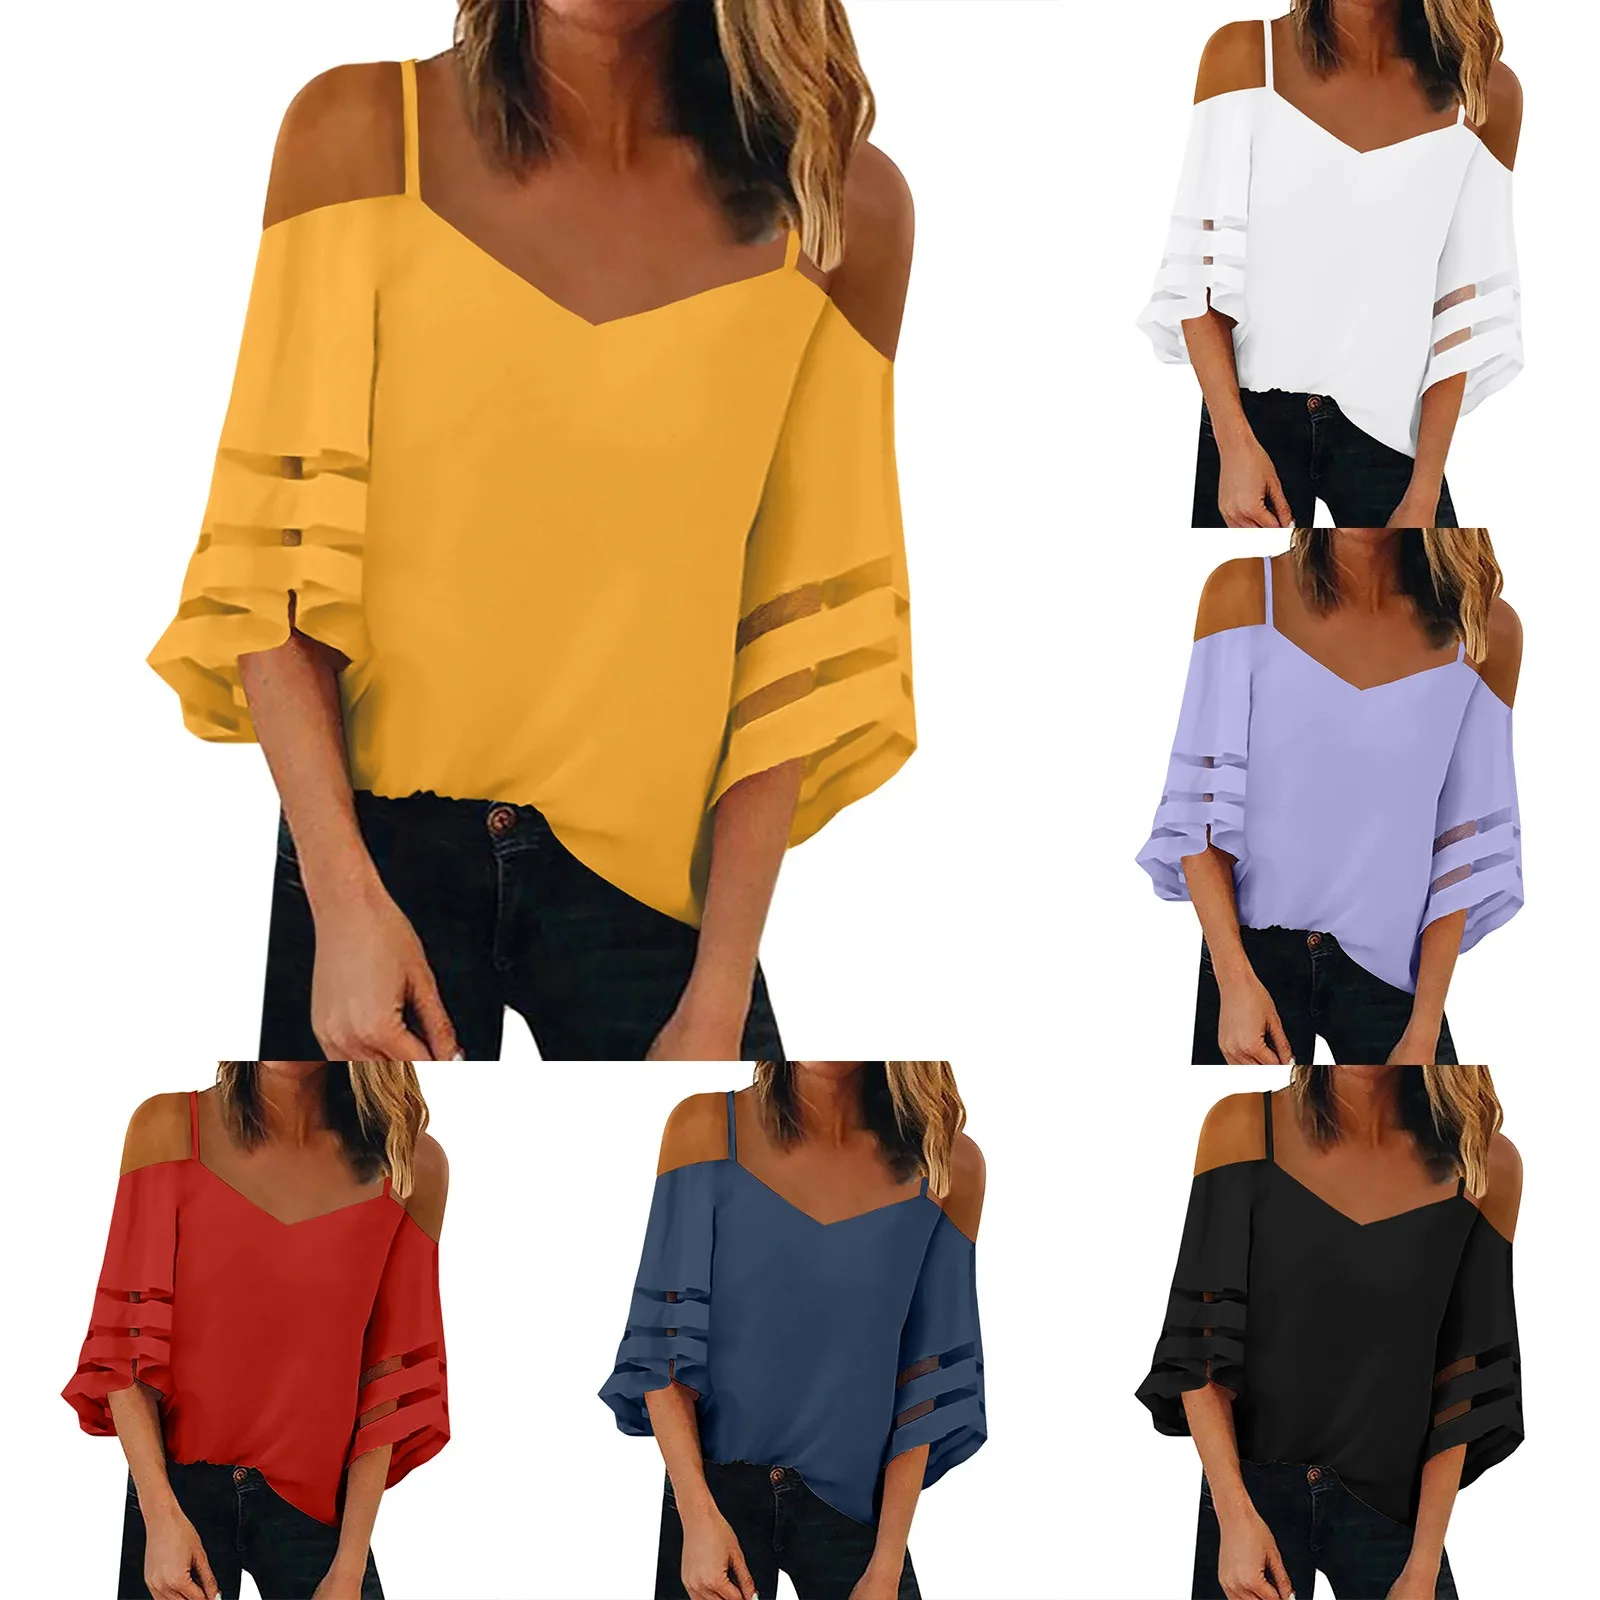 

Women Sexy Off Shoulder Mesh Top Spaghetti Straps Cold Shoulders Streetwear Blouse 2023 Summer New Elegant Tops Blusas y Camisas